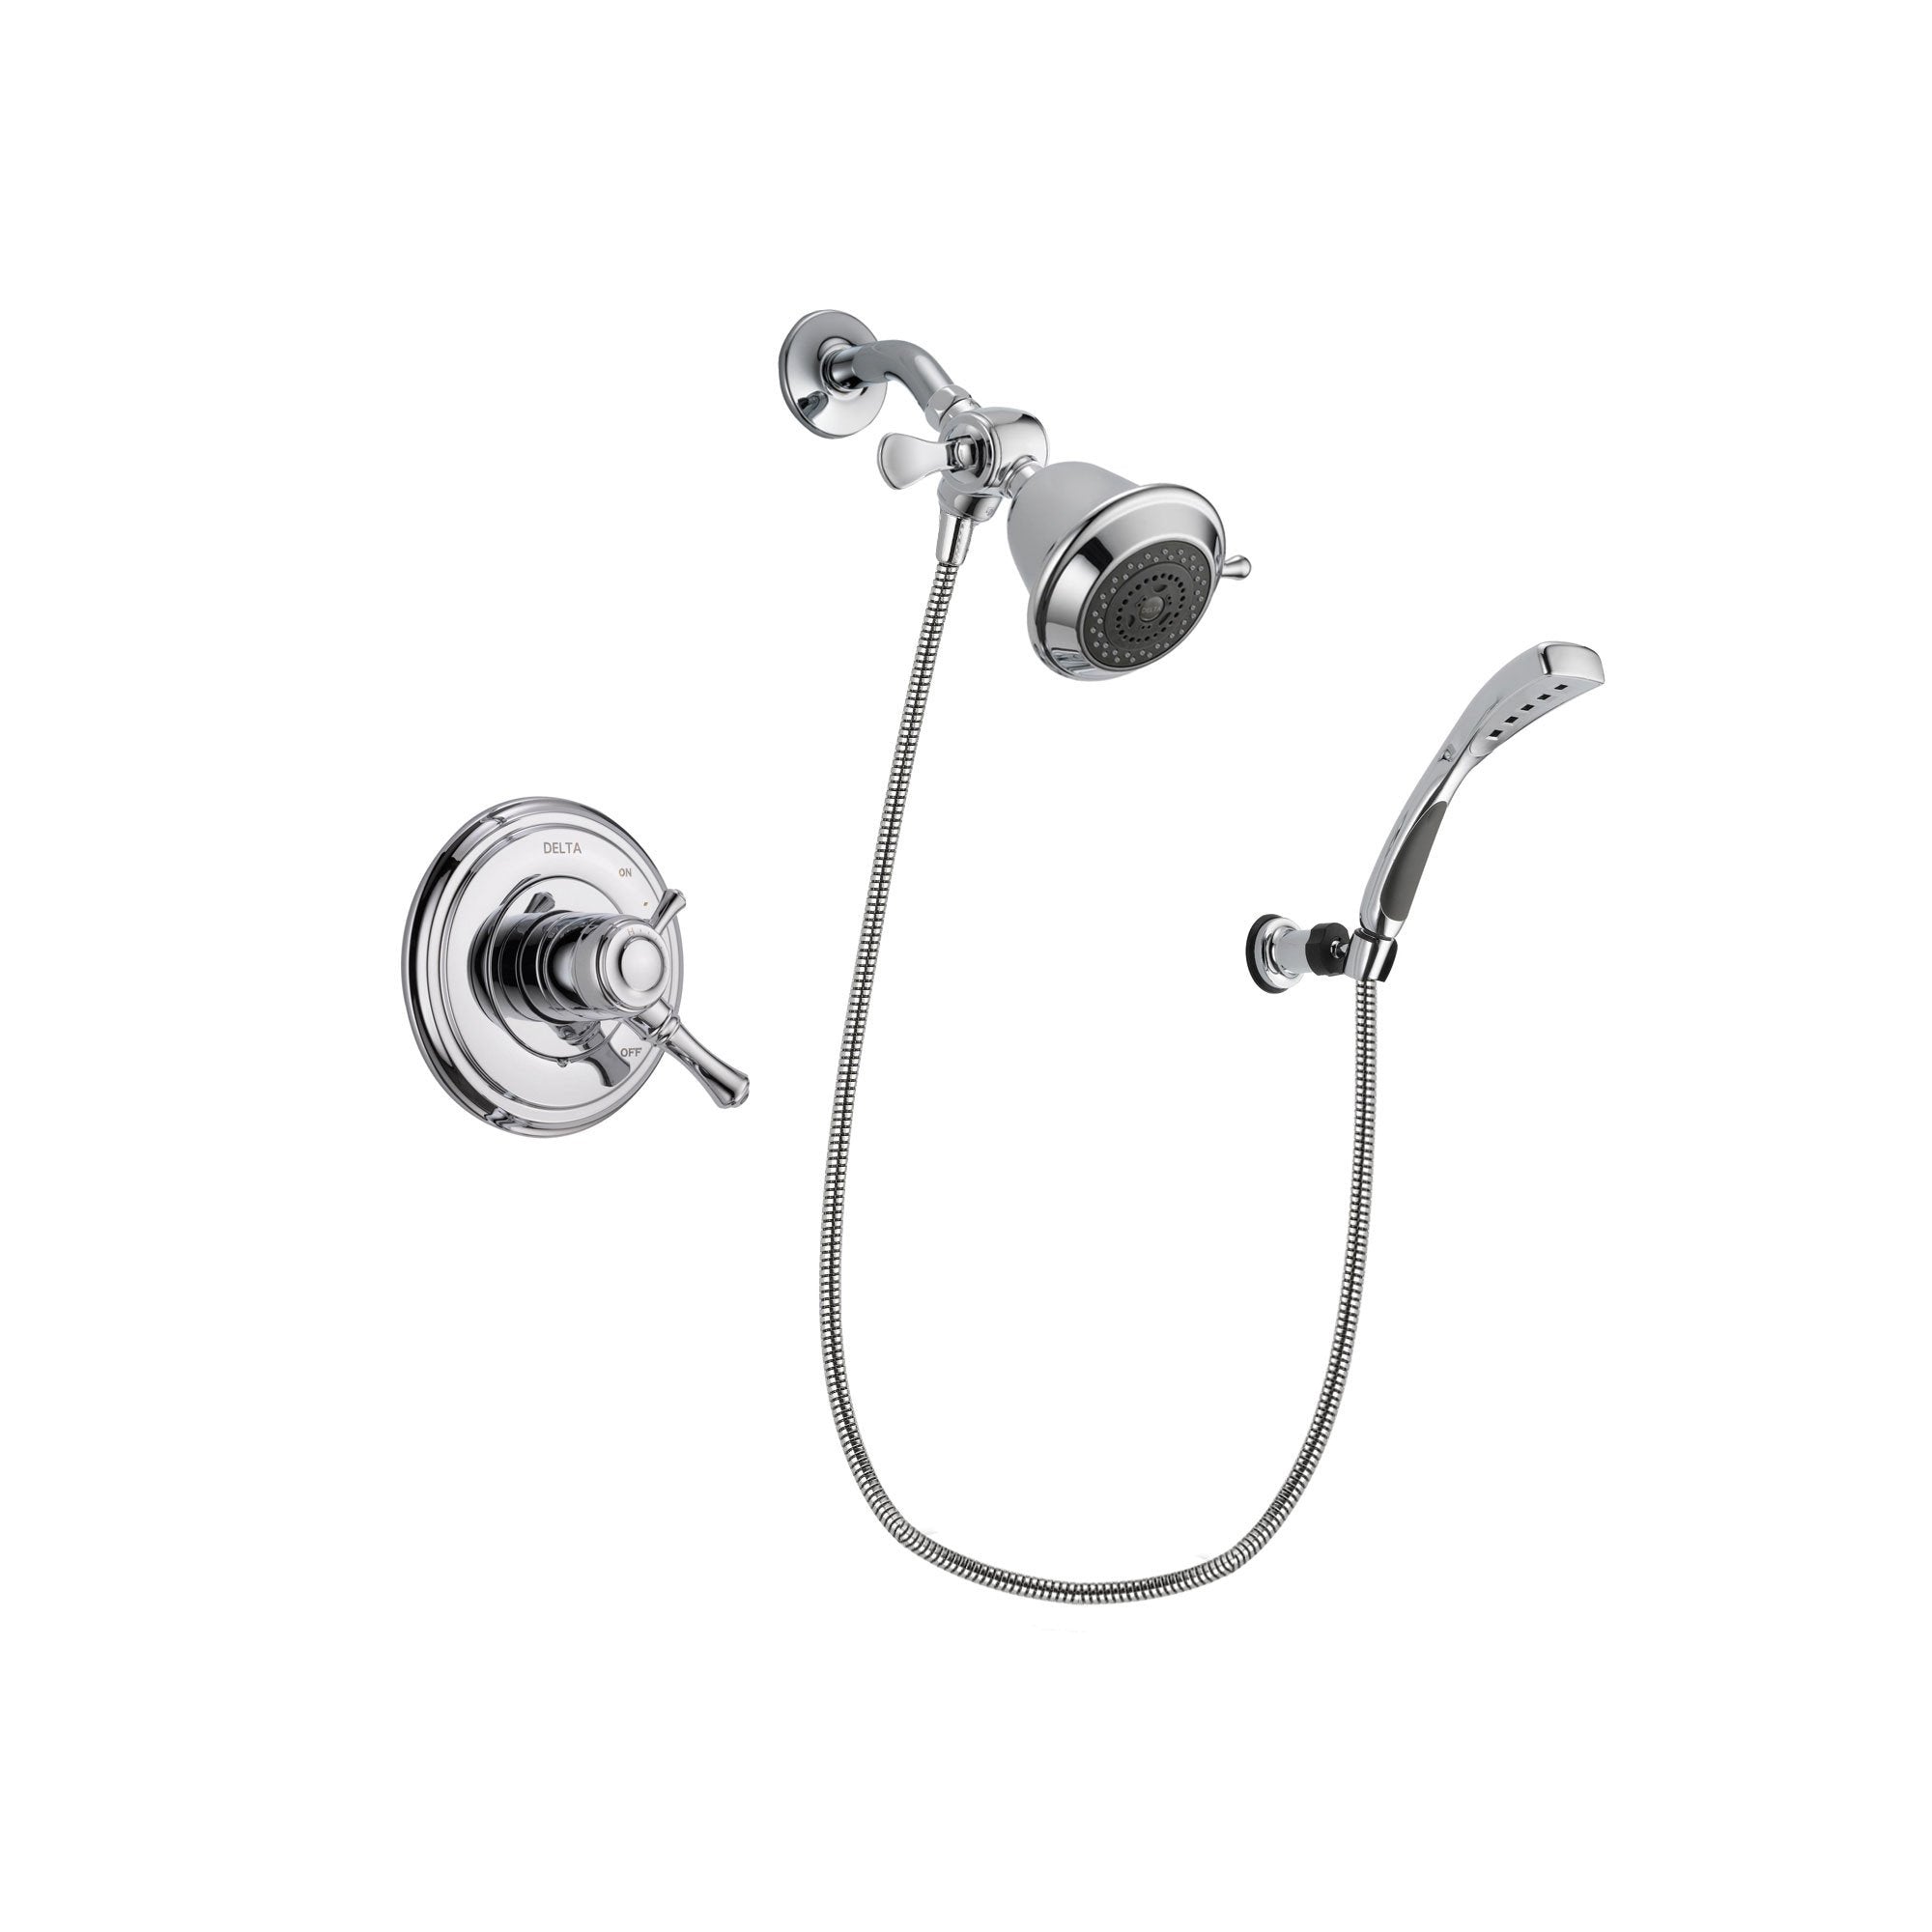 Delta Cassidy Chrome Finish Dual Control Shower Faucet System Package with Shower Head and Wall-Mount Bracket with Handheld Shower Spray Includes Rough-in Valve DSP1002V